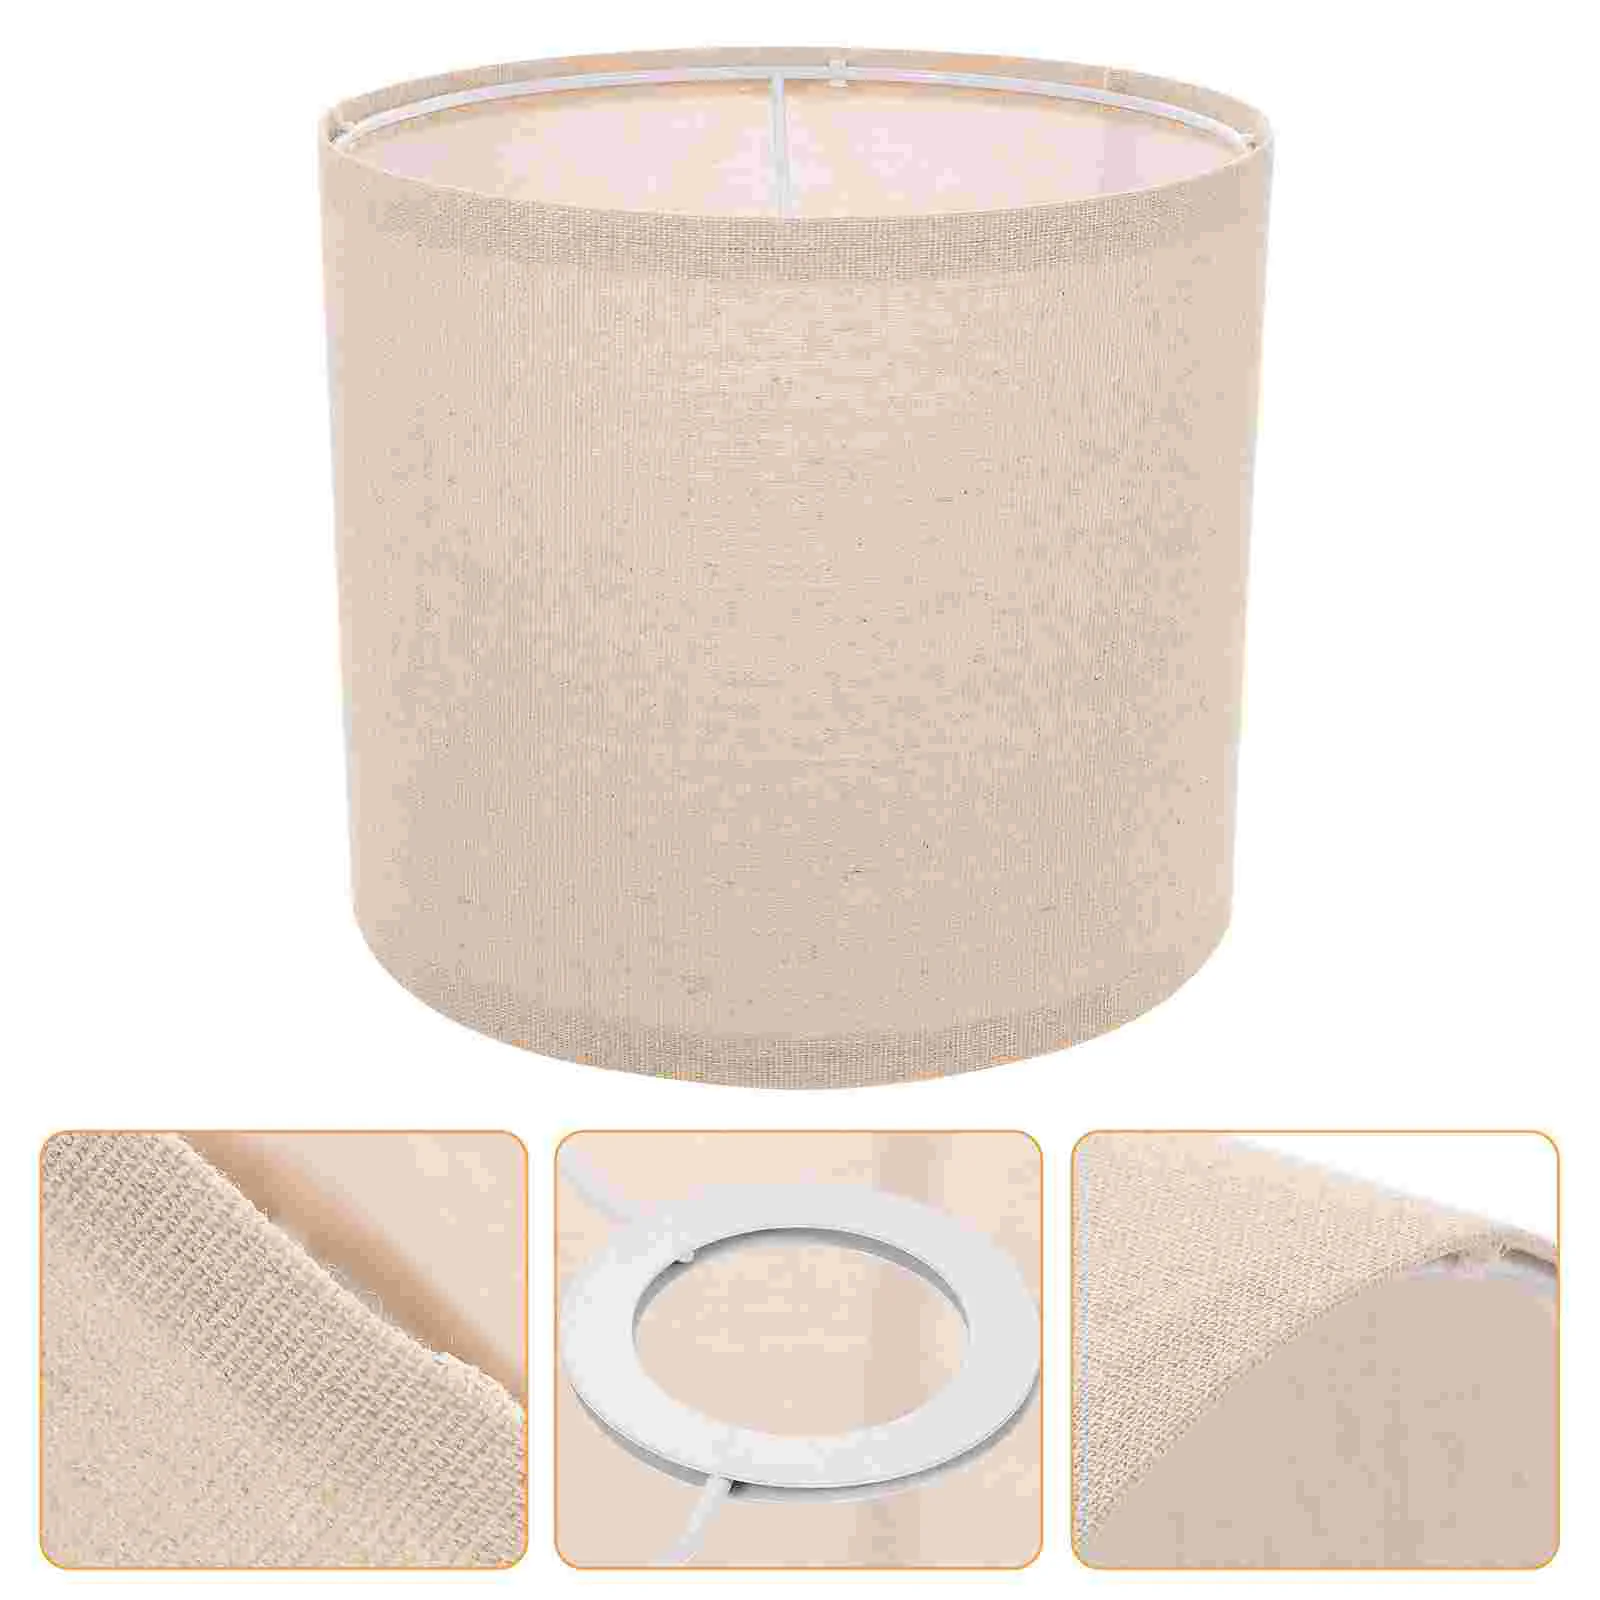 2pcs drum lampshades replacement easy assembly linen lamp shades for table lampss floor lamps 2Pcs Medium Drum Lamp Shades - Replacement Lampshades Table Lamp Shade Linen Clip On Chandelier Lamp Shades Lamp Office